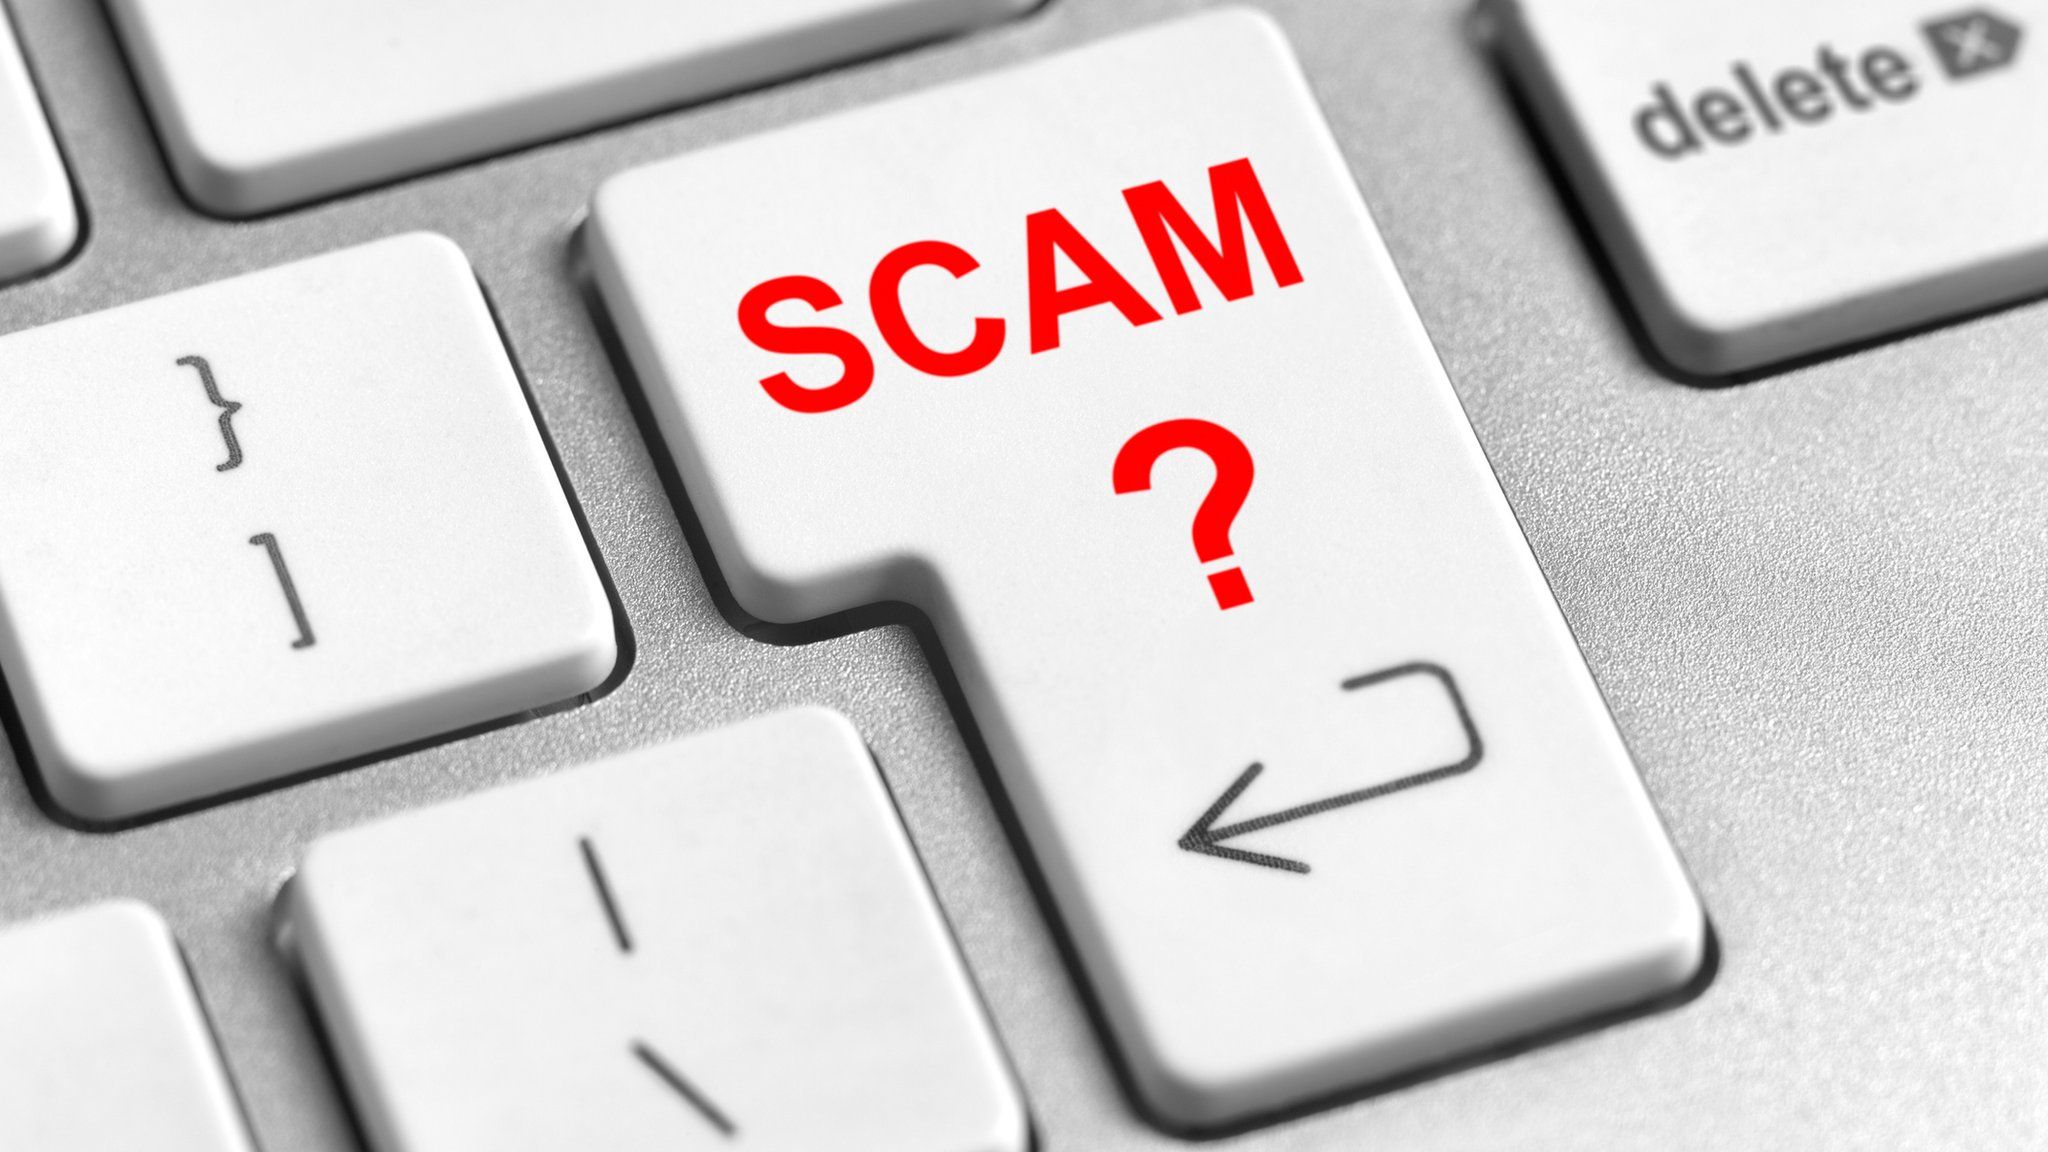 The number of investment scams has quadrupled since the UK lockdown began in March.